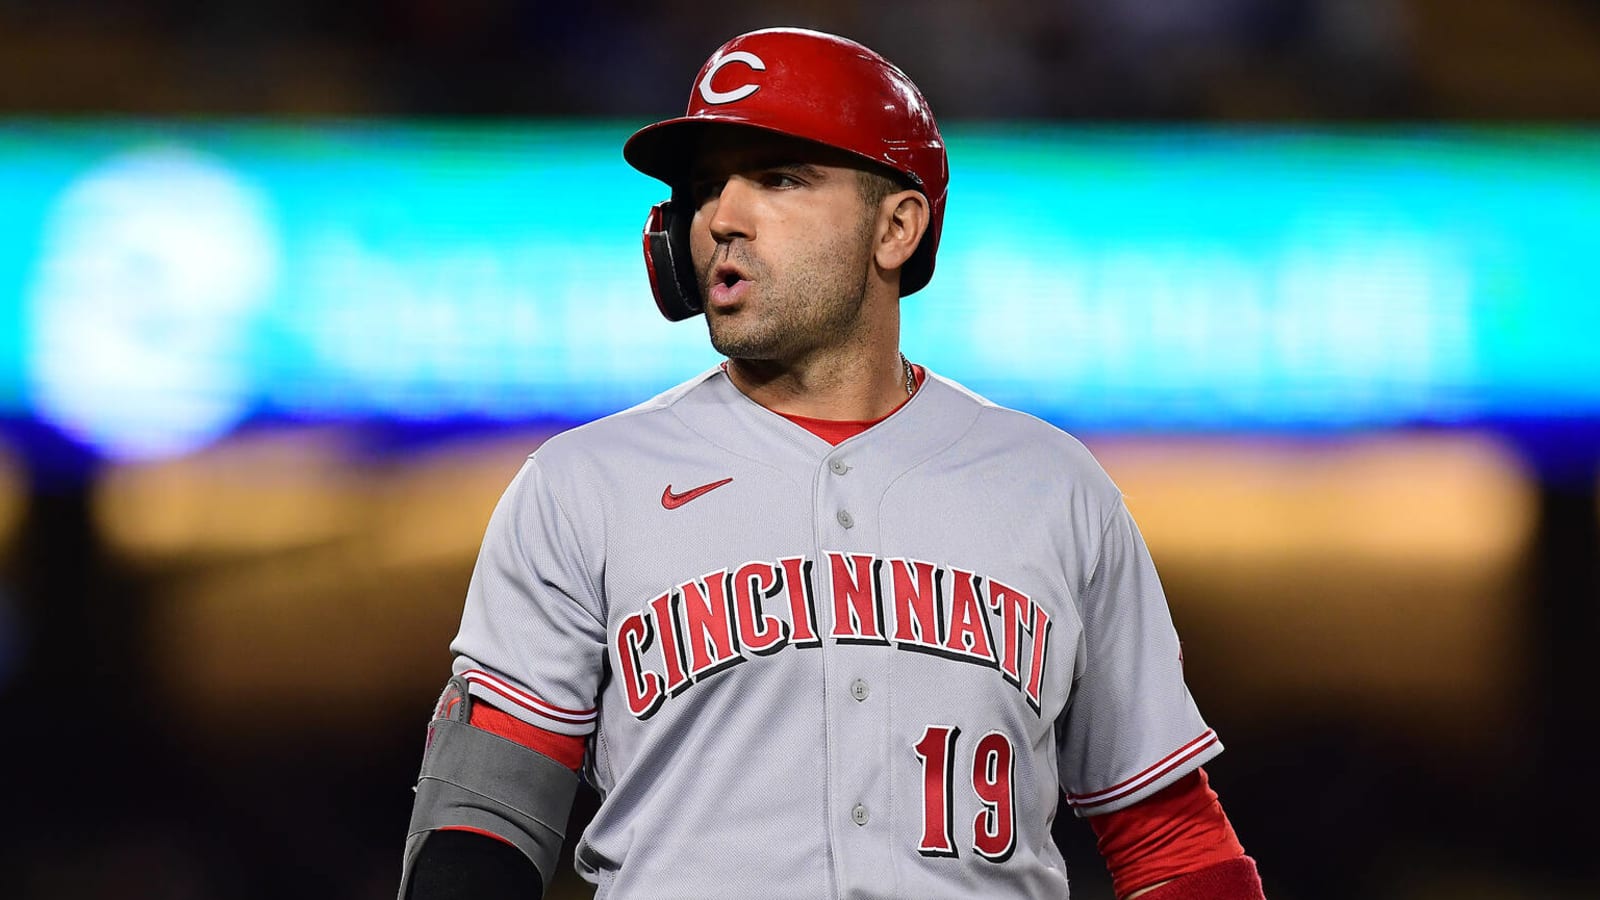 Joey Votto goes off over Reds' horrific start to season